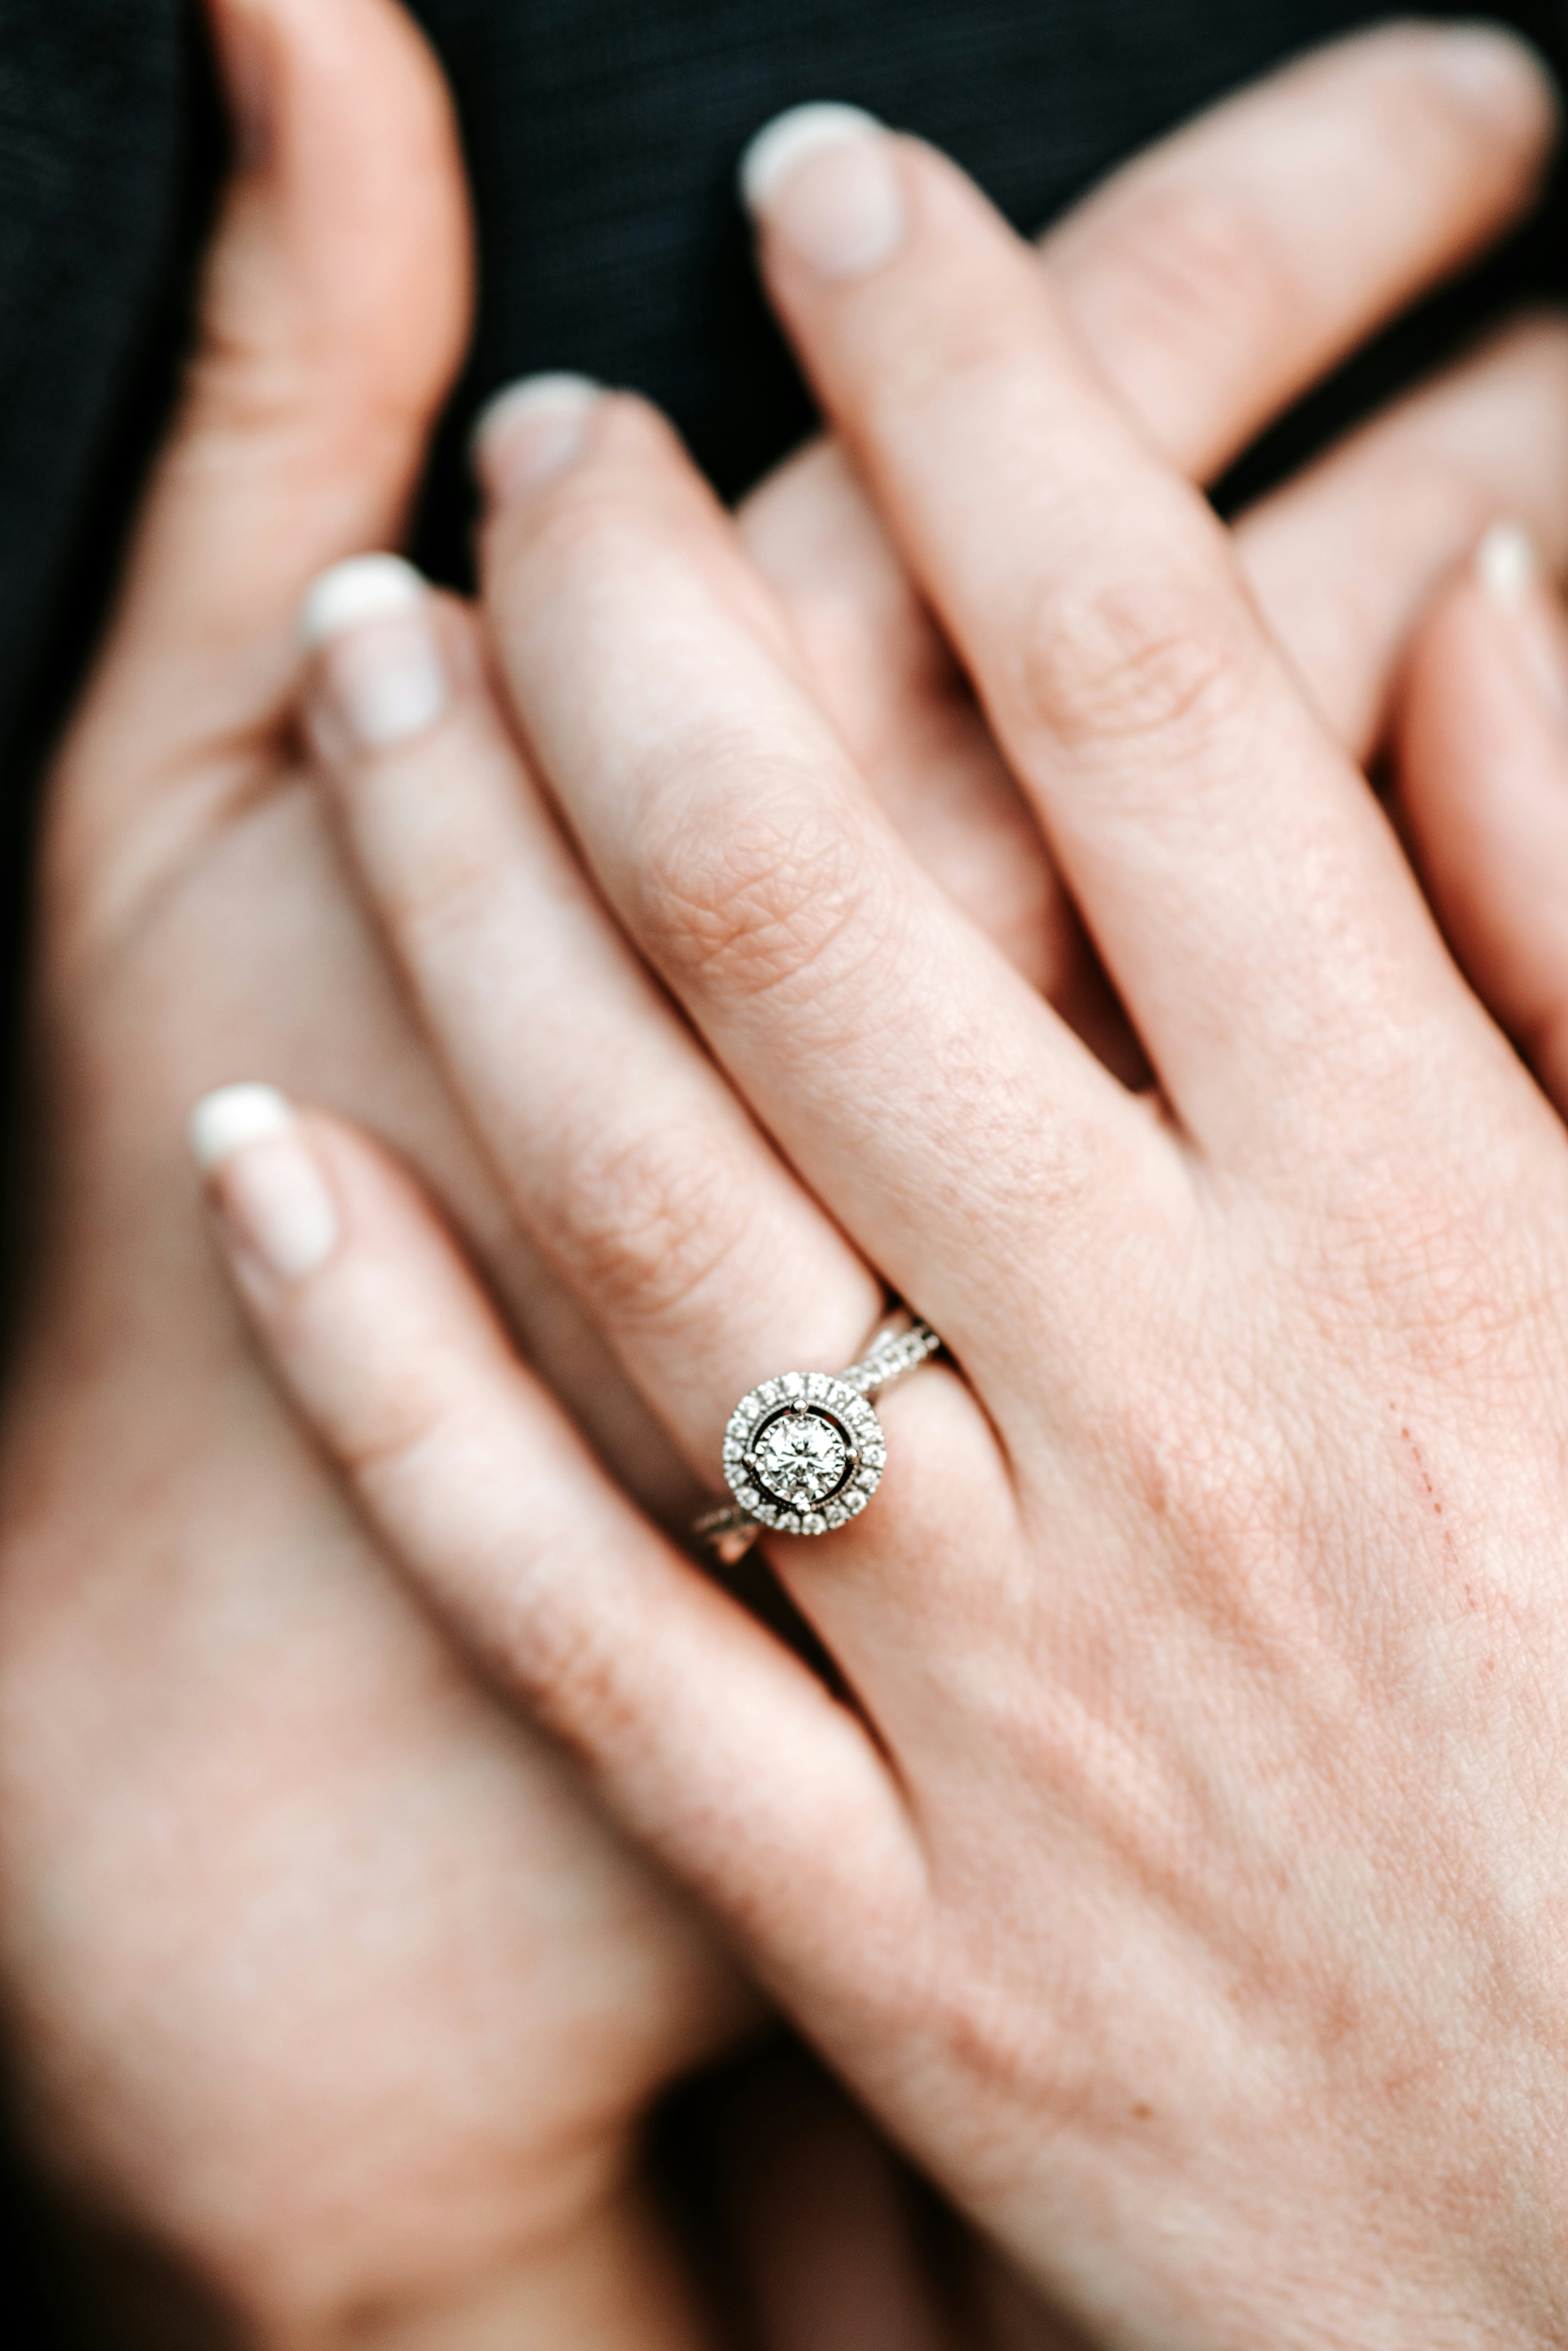 great photo recipe,how to photograph person wearing silver-colored ring